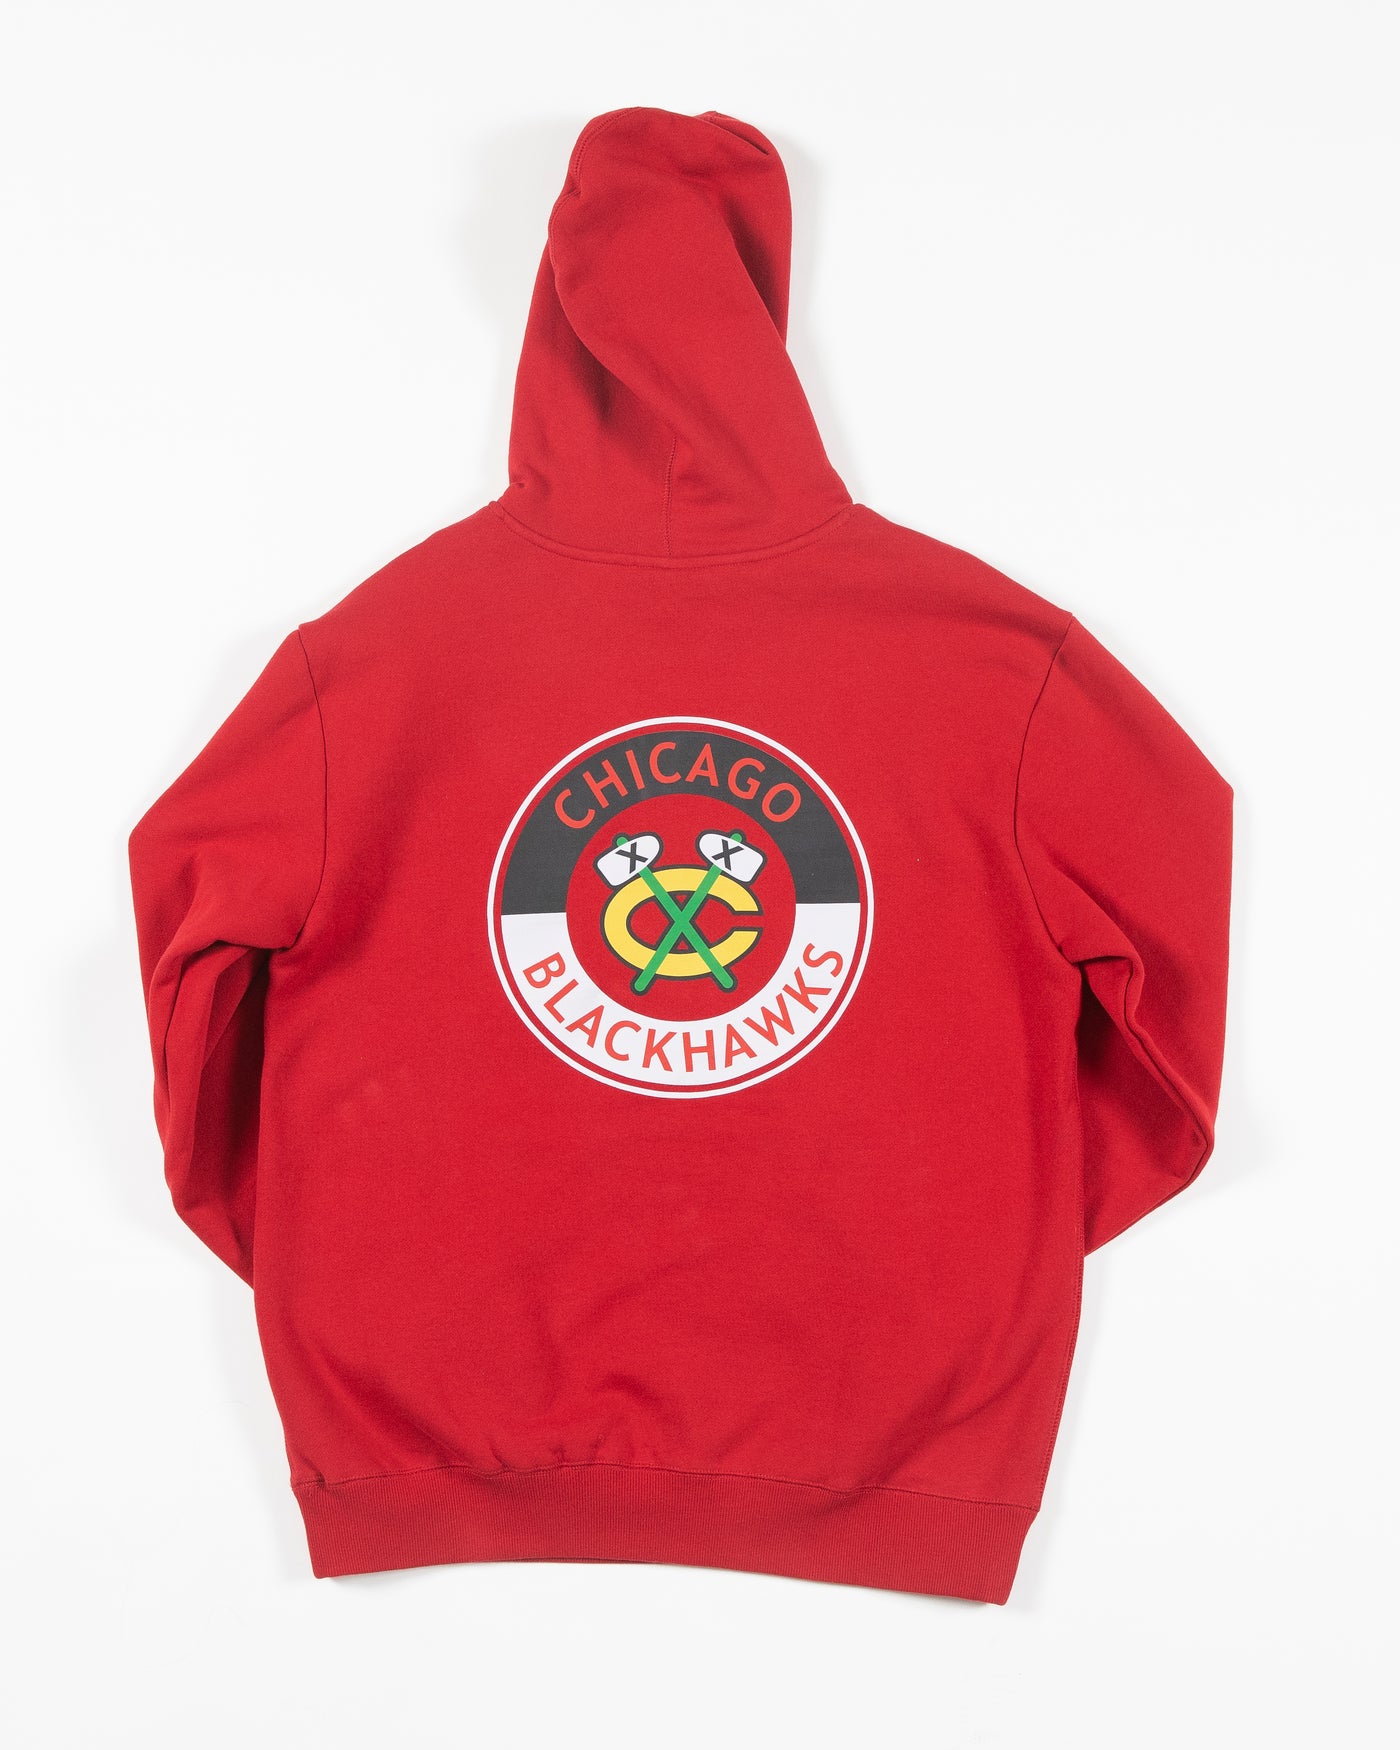 red Mitchell & Ness hoodie with Chicago Blackhawks secondary logo and wordmark graphic - back lay flat